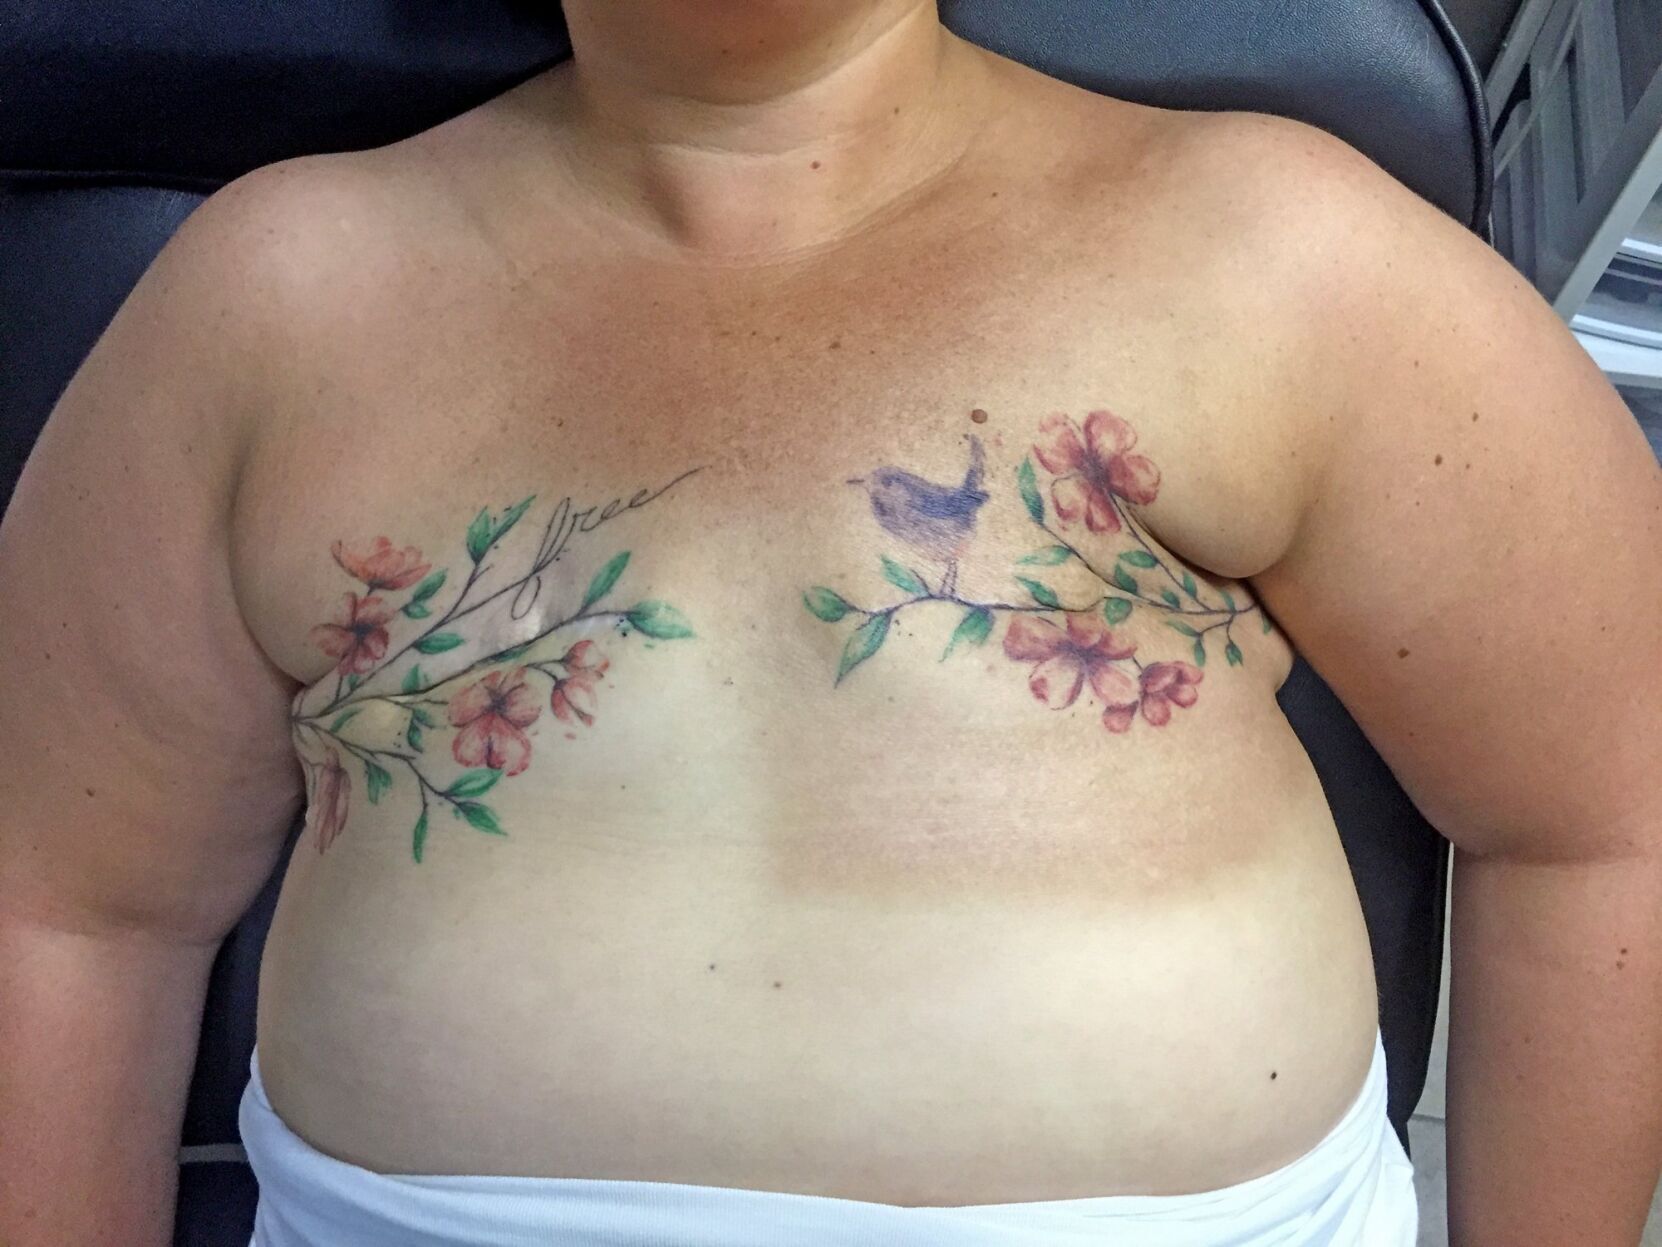 Tattoos After Lymph Node Removal: Are They Safe? | MyBCTeam